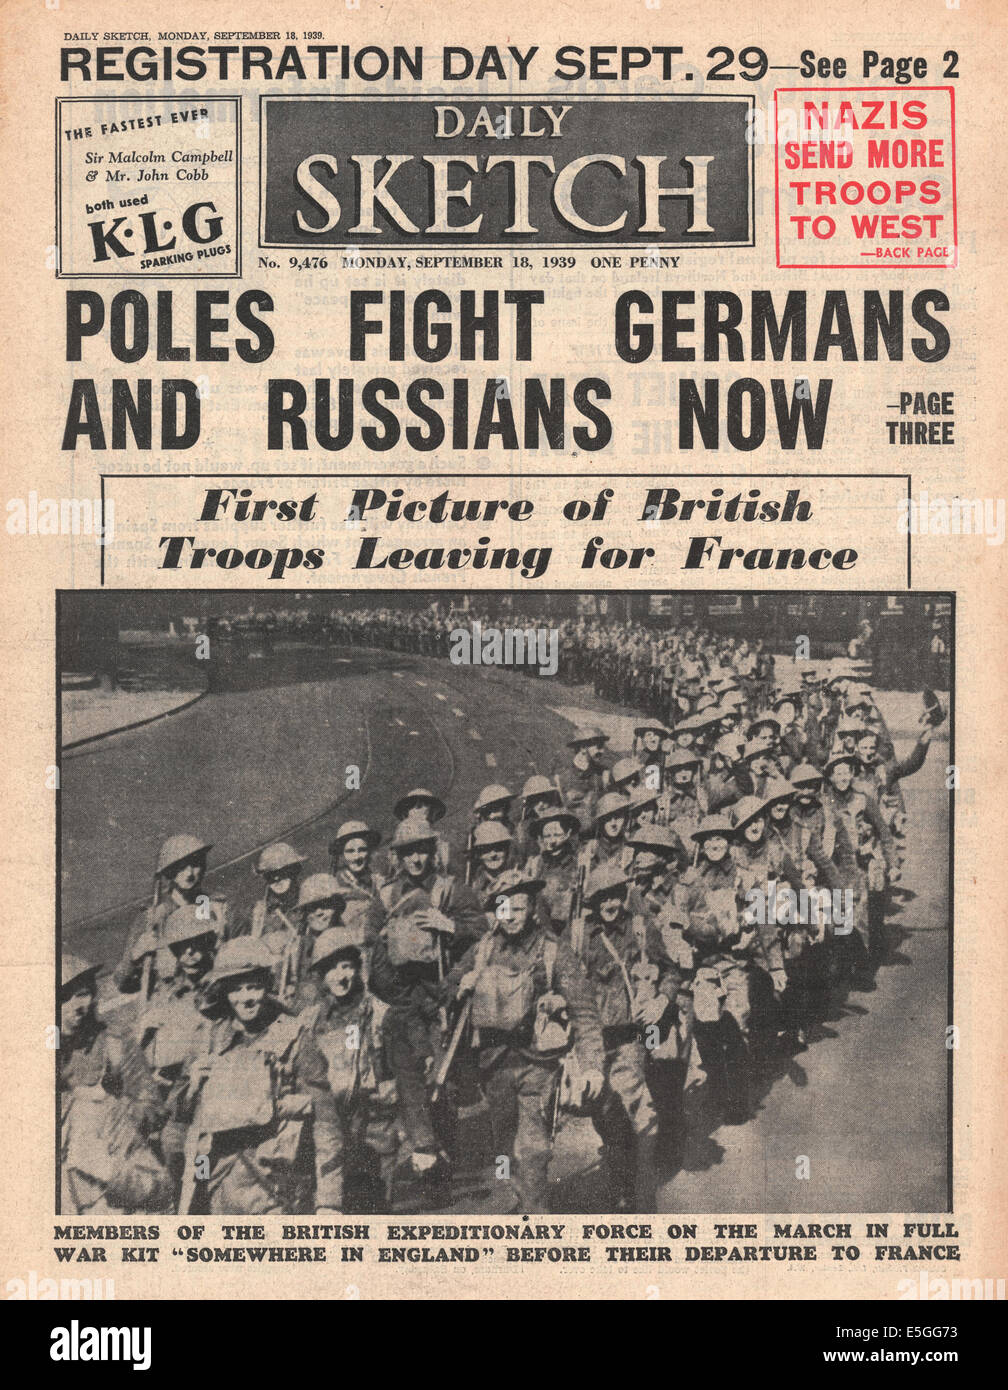 1939 Daily Sketch front page reporting invasion of Poland by Soviet Union Stock Photo